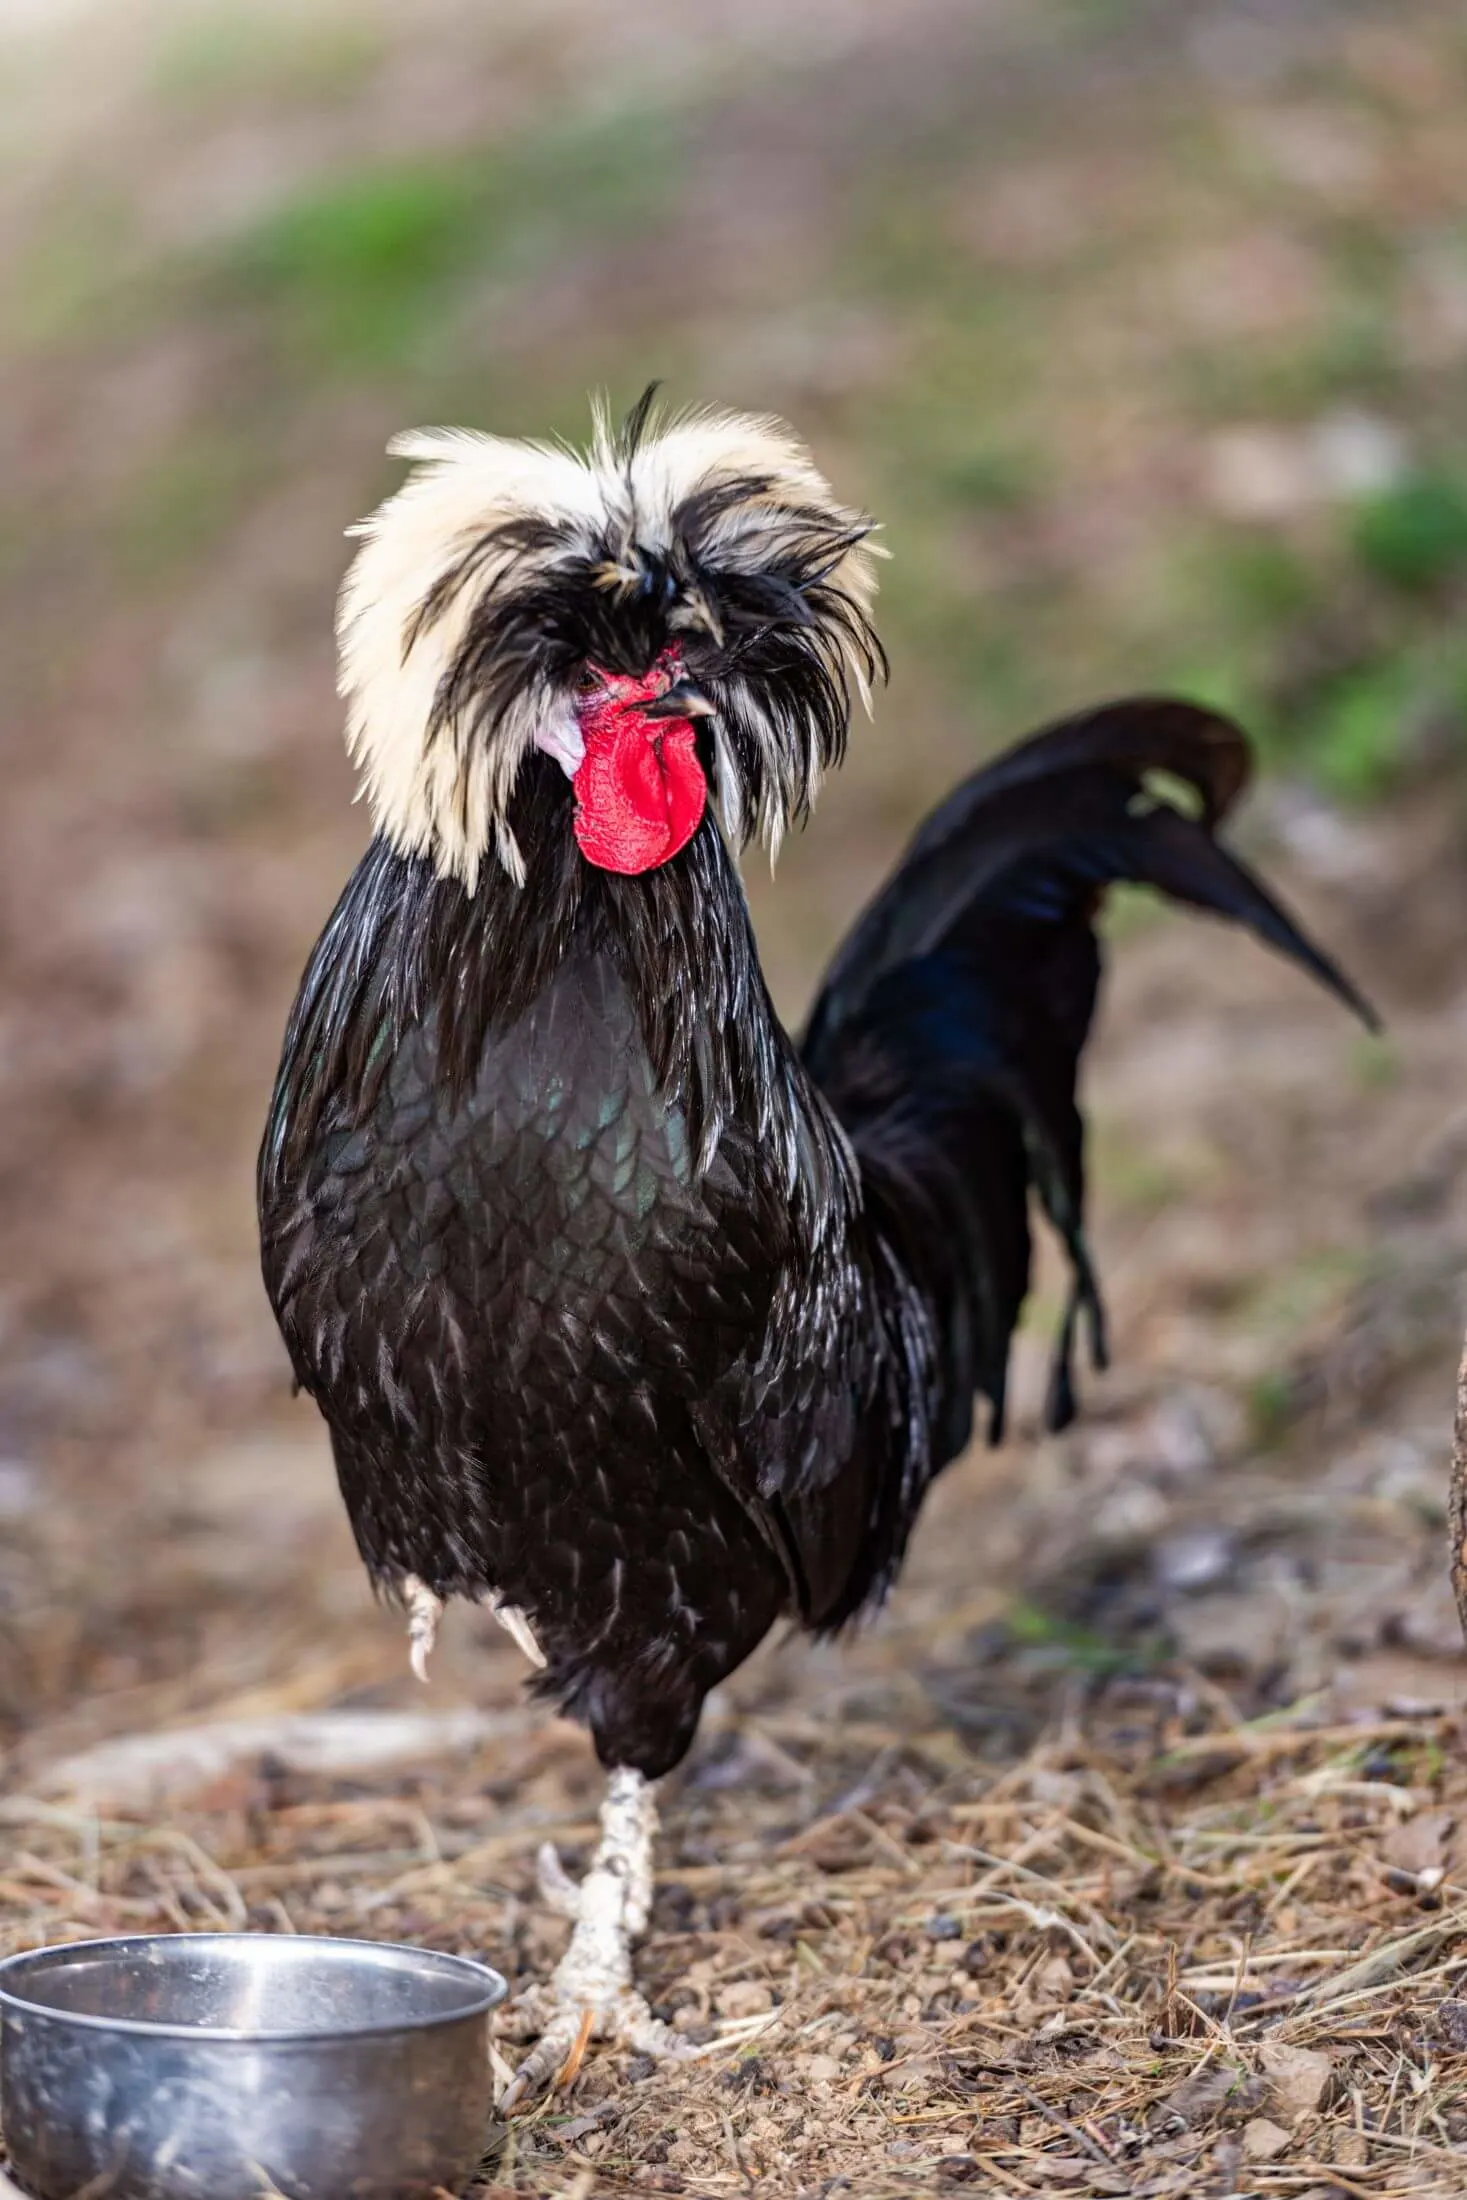 White crested black polish rooster. 